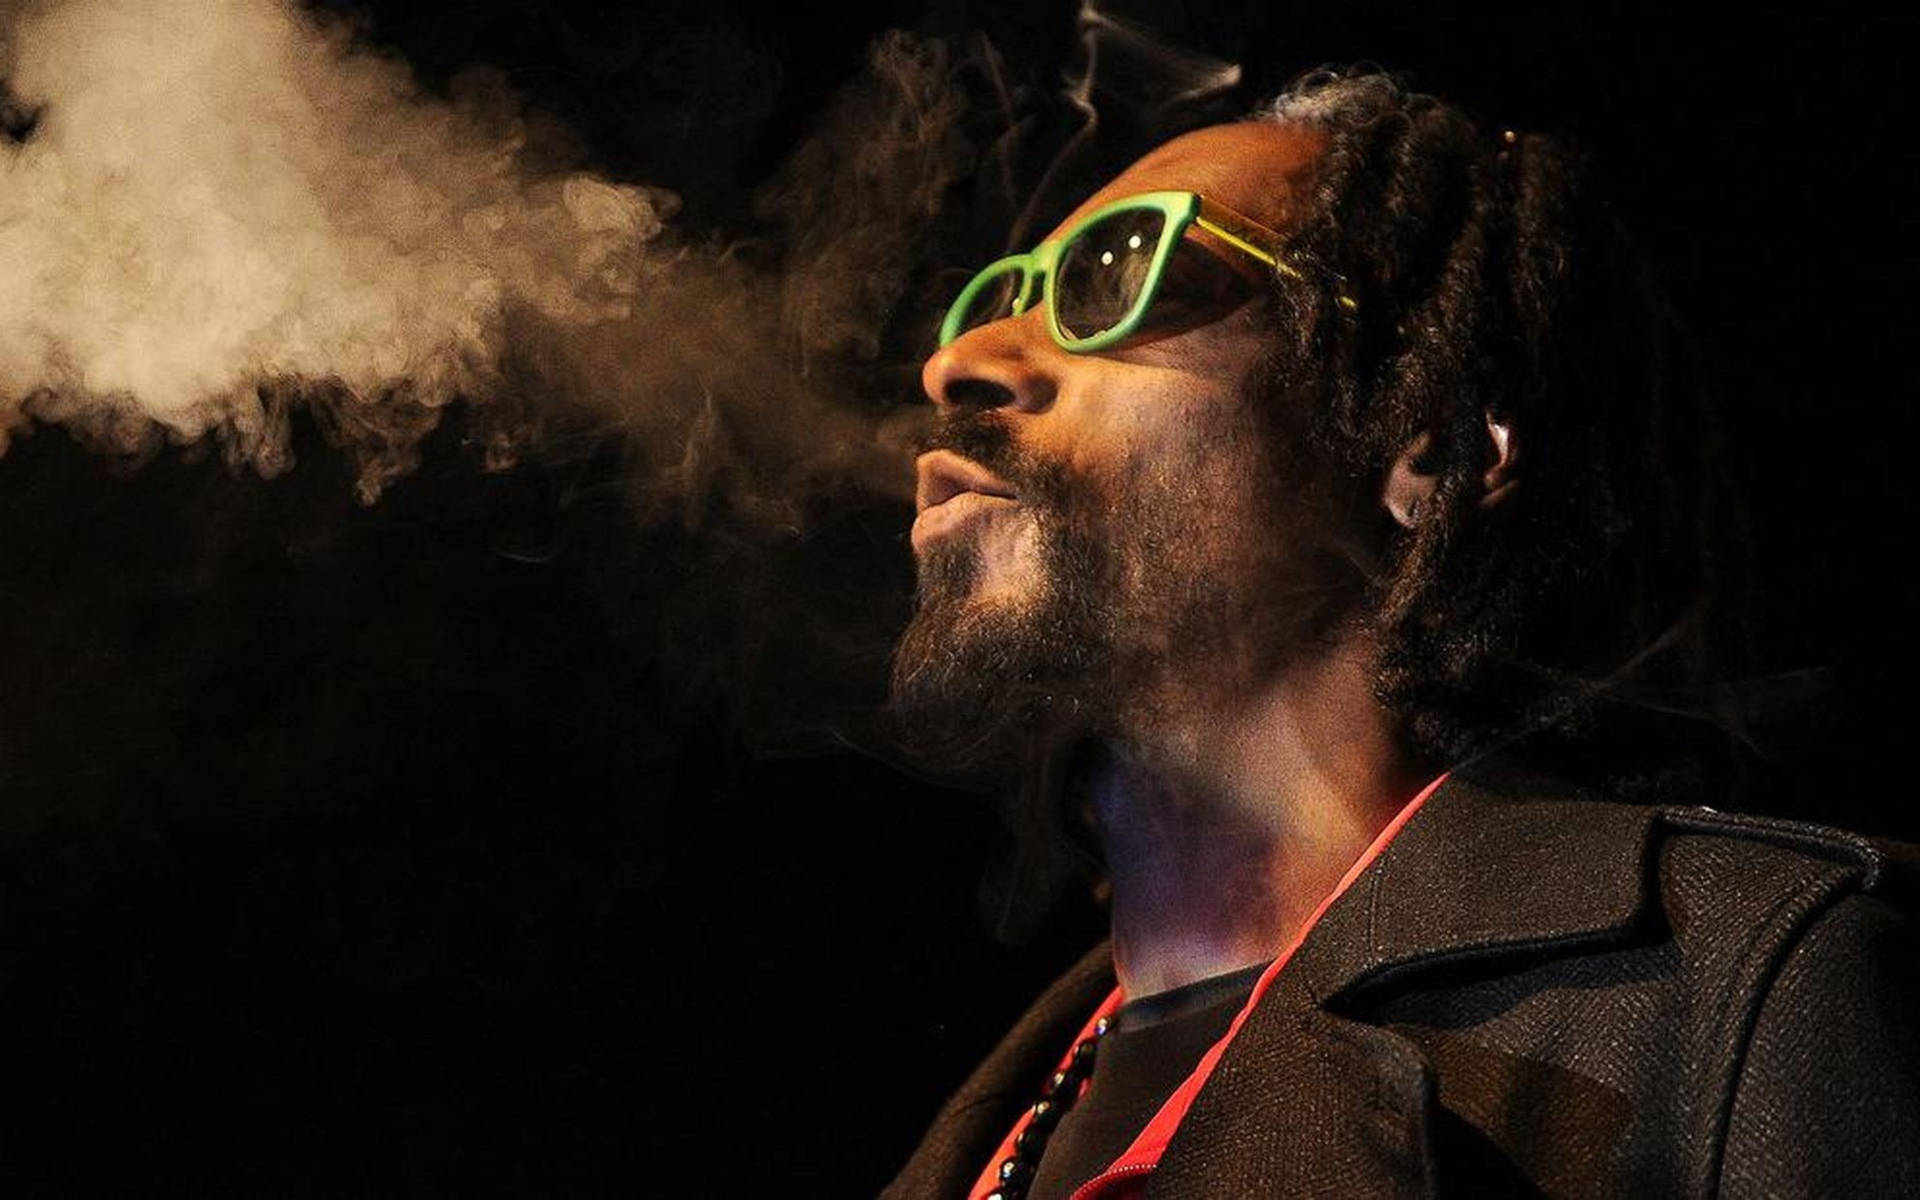 Snoop Dogg Rapper Smoking Weed Background